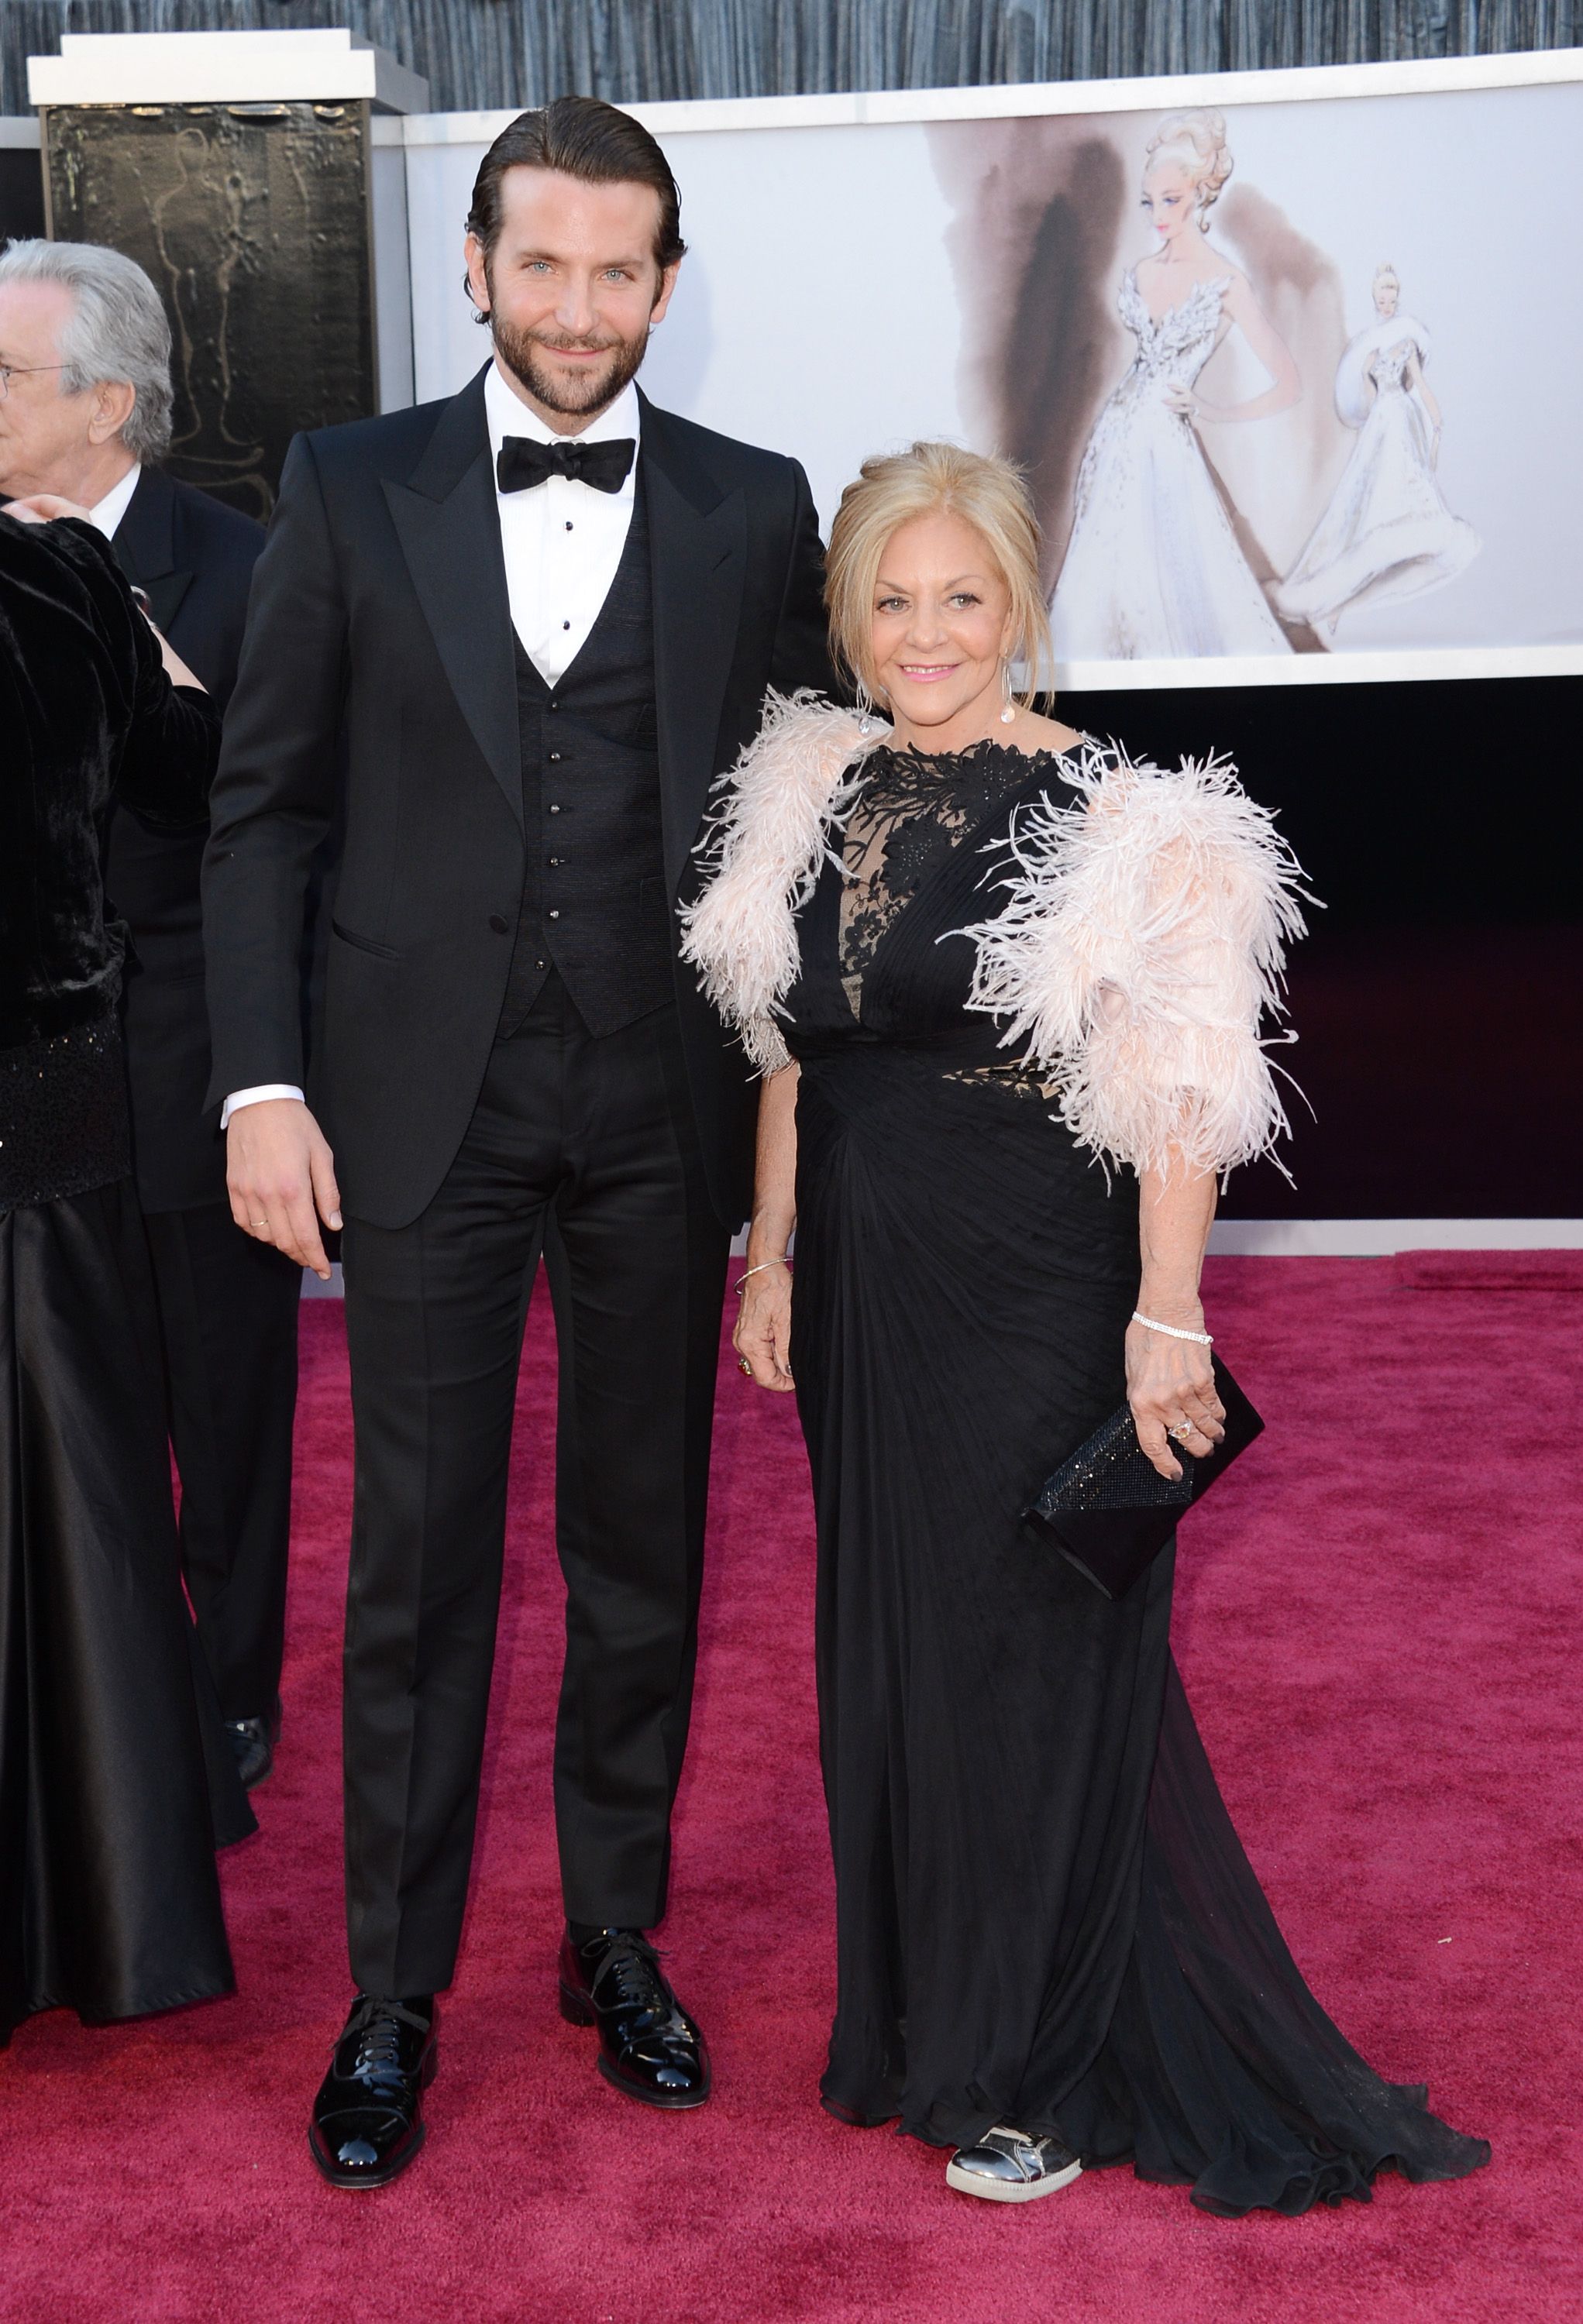 Bradley Cooper and his mother Gloria Cooper at the Oscars at Hollywood & Highland Center on February 24, 2013 in Hollywood, California. | Source: Getty Images